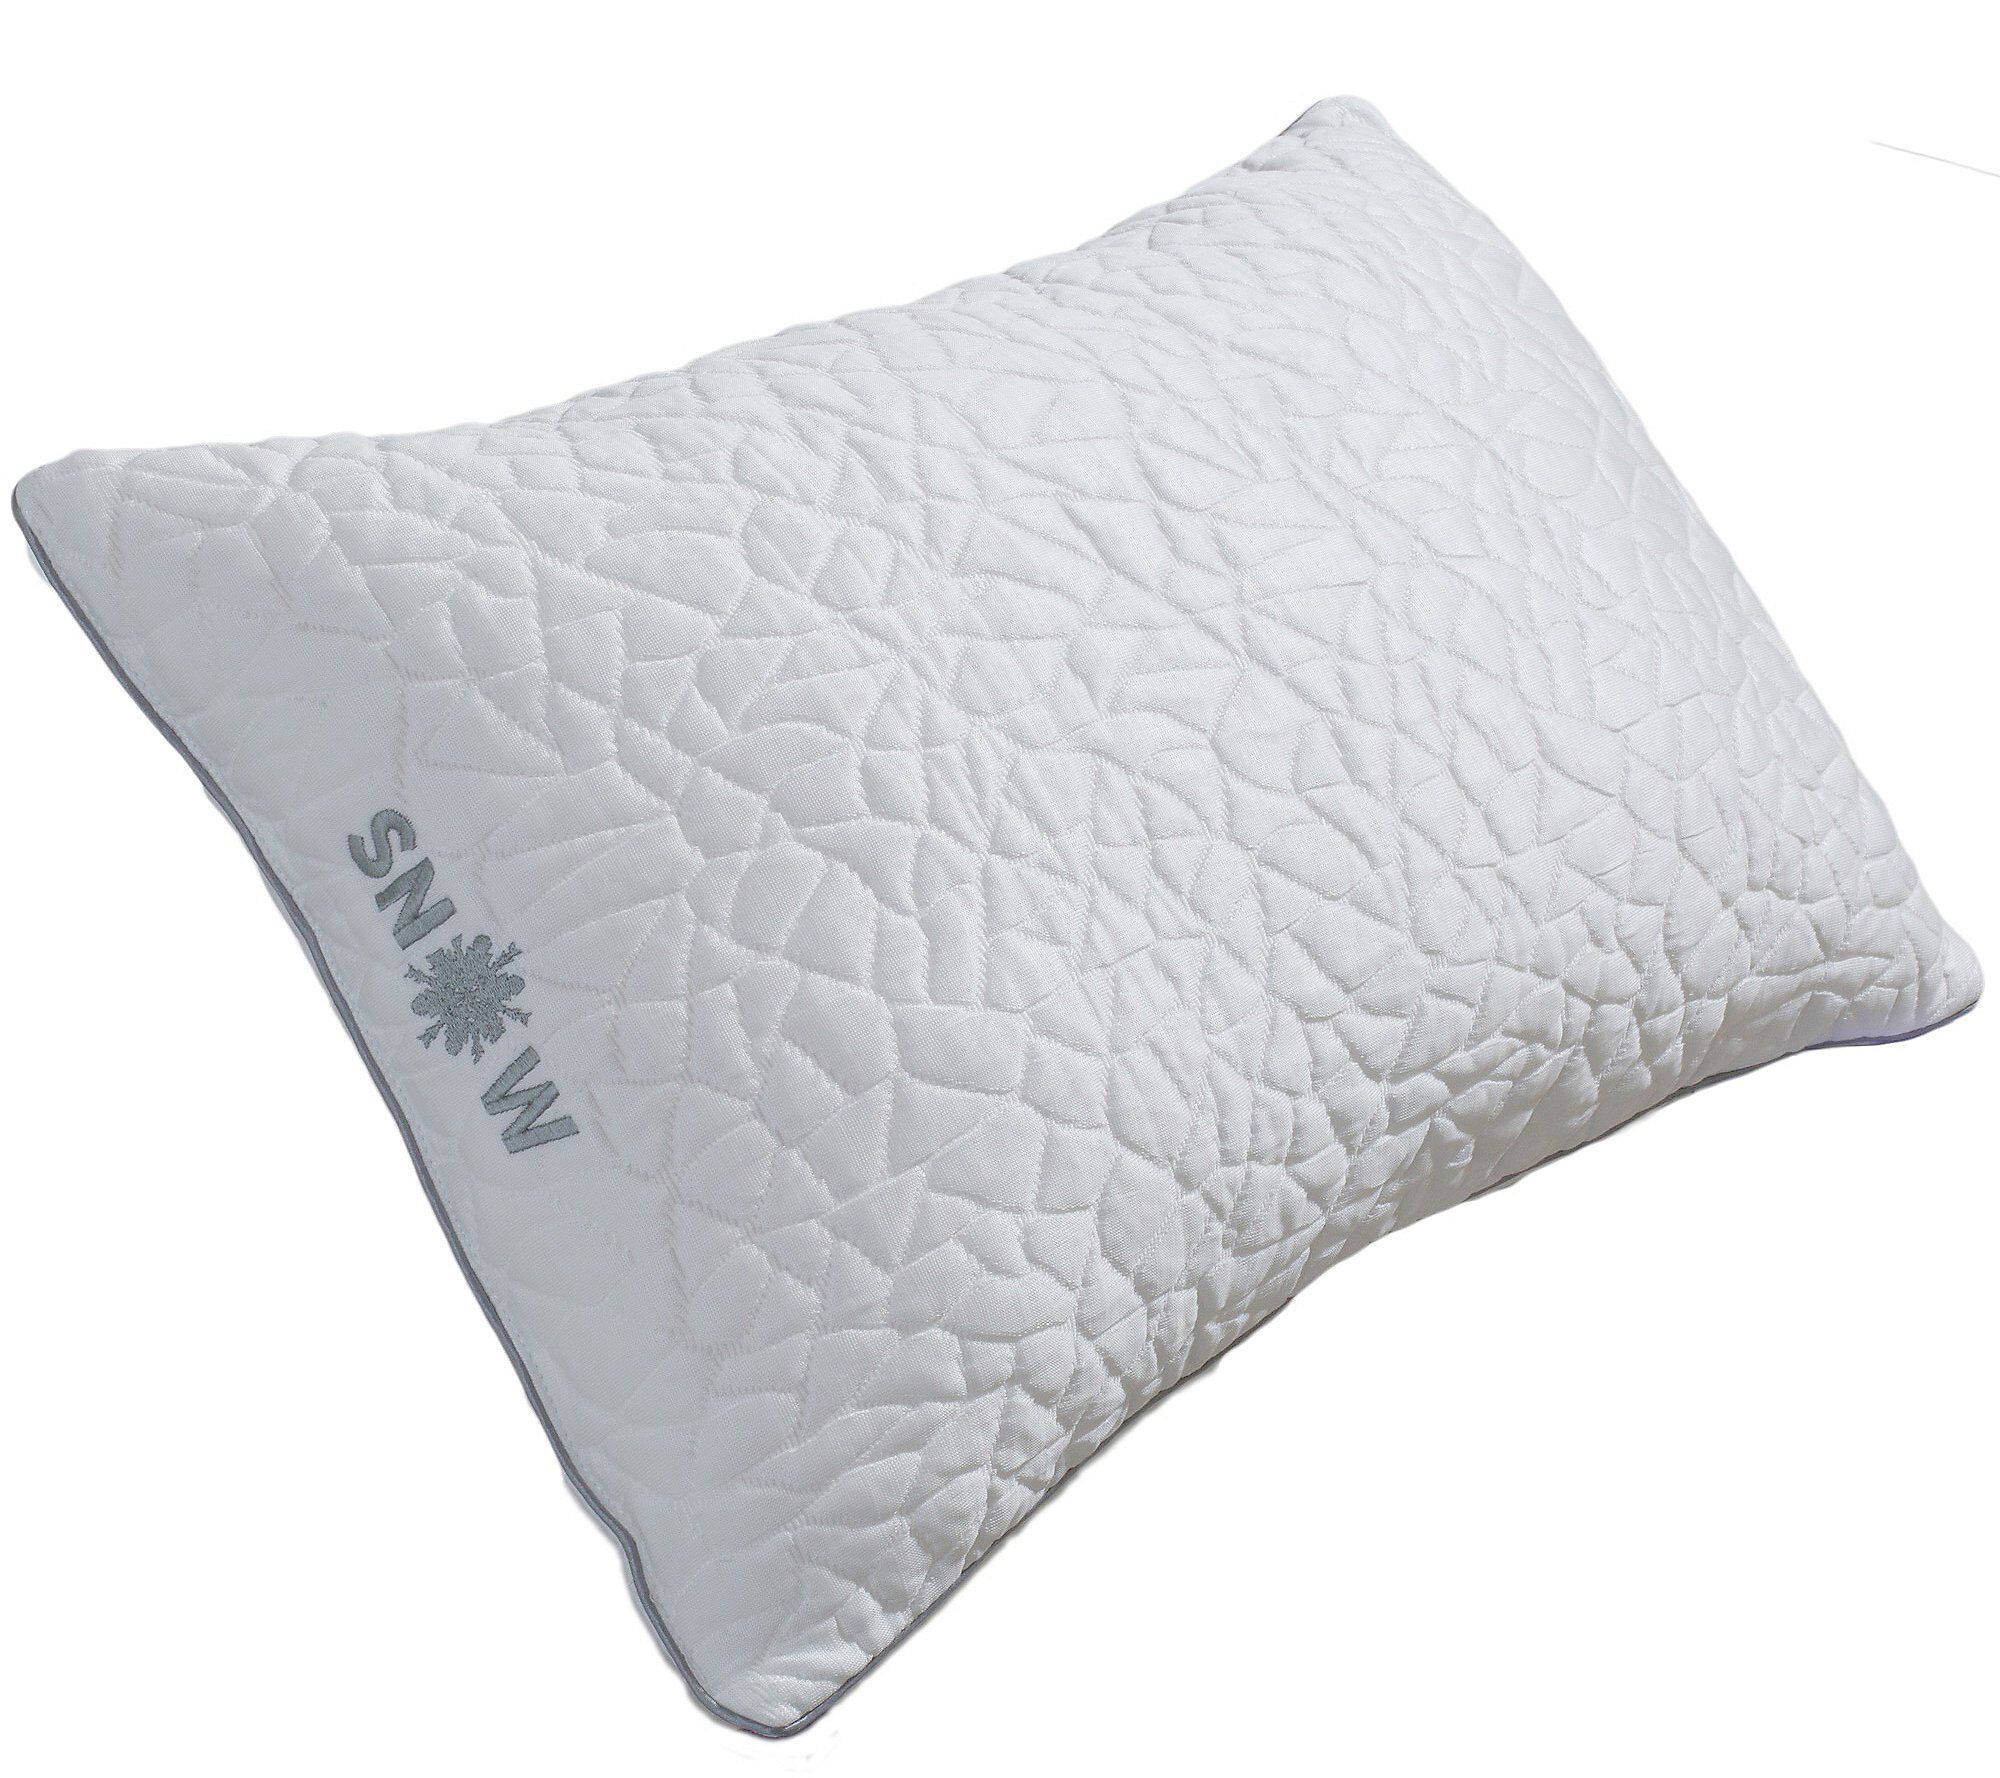 Protect a Bed Pillow Microfiber With Pocket Springs Soft Medium Firm Zefiro 